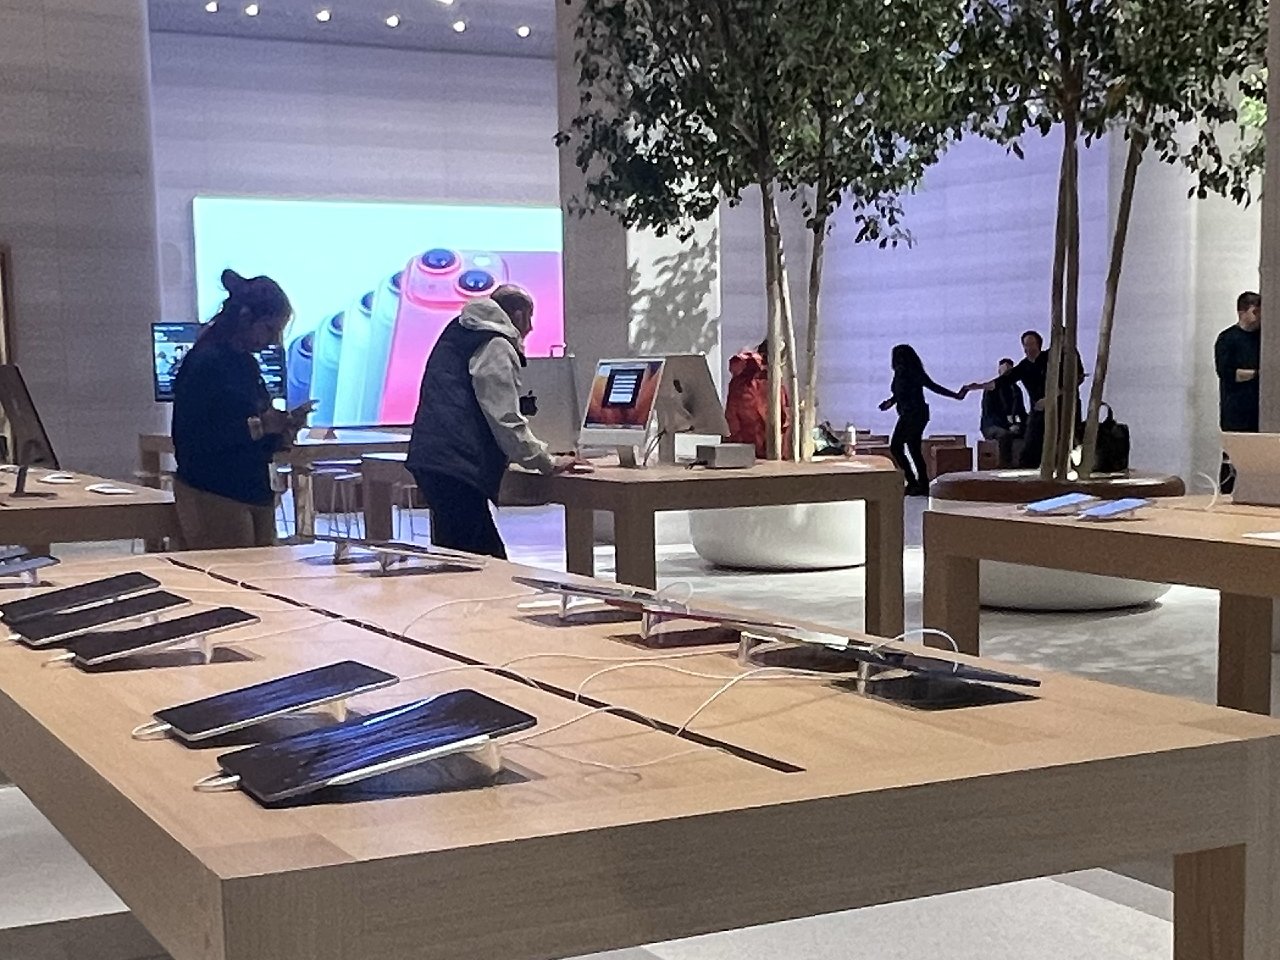 There are 17 regular Apple Store tables in amongst the trees